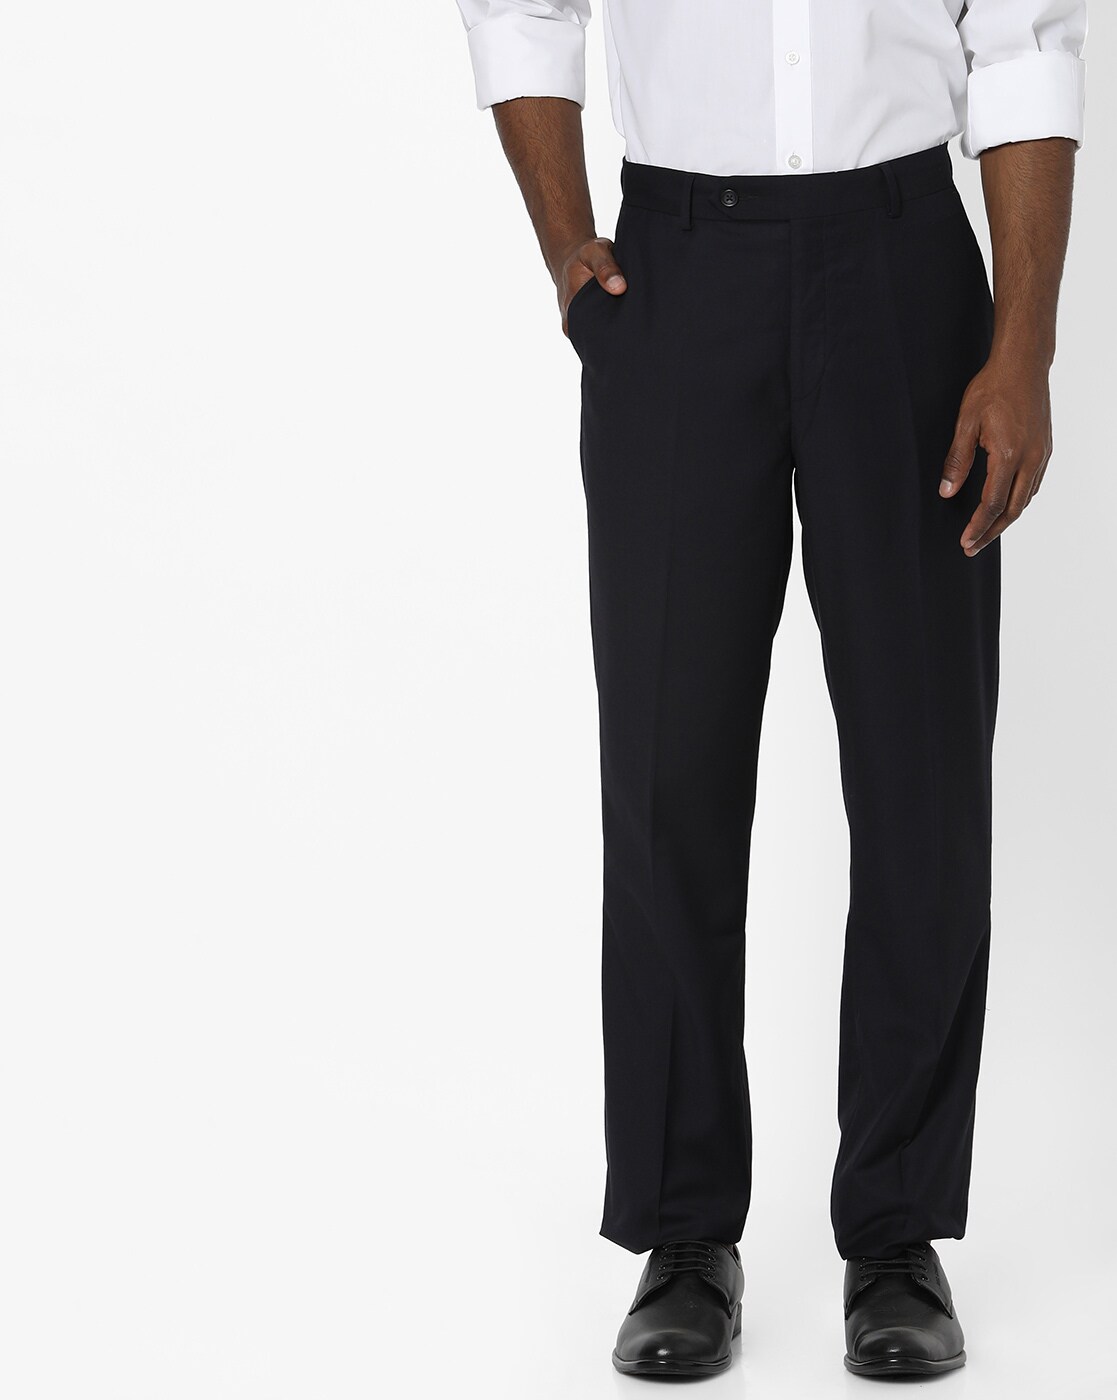 Buy Khaki Trousers  Pants for Men by Wills Lifestyle Online  Ajiocom